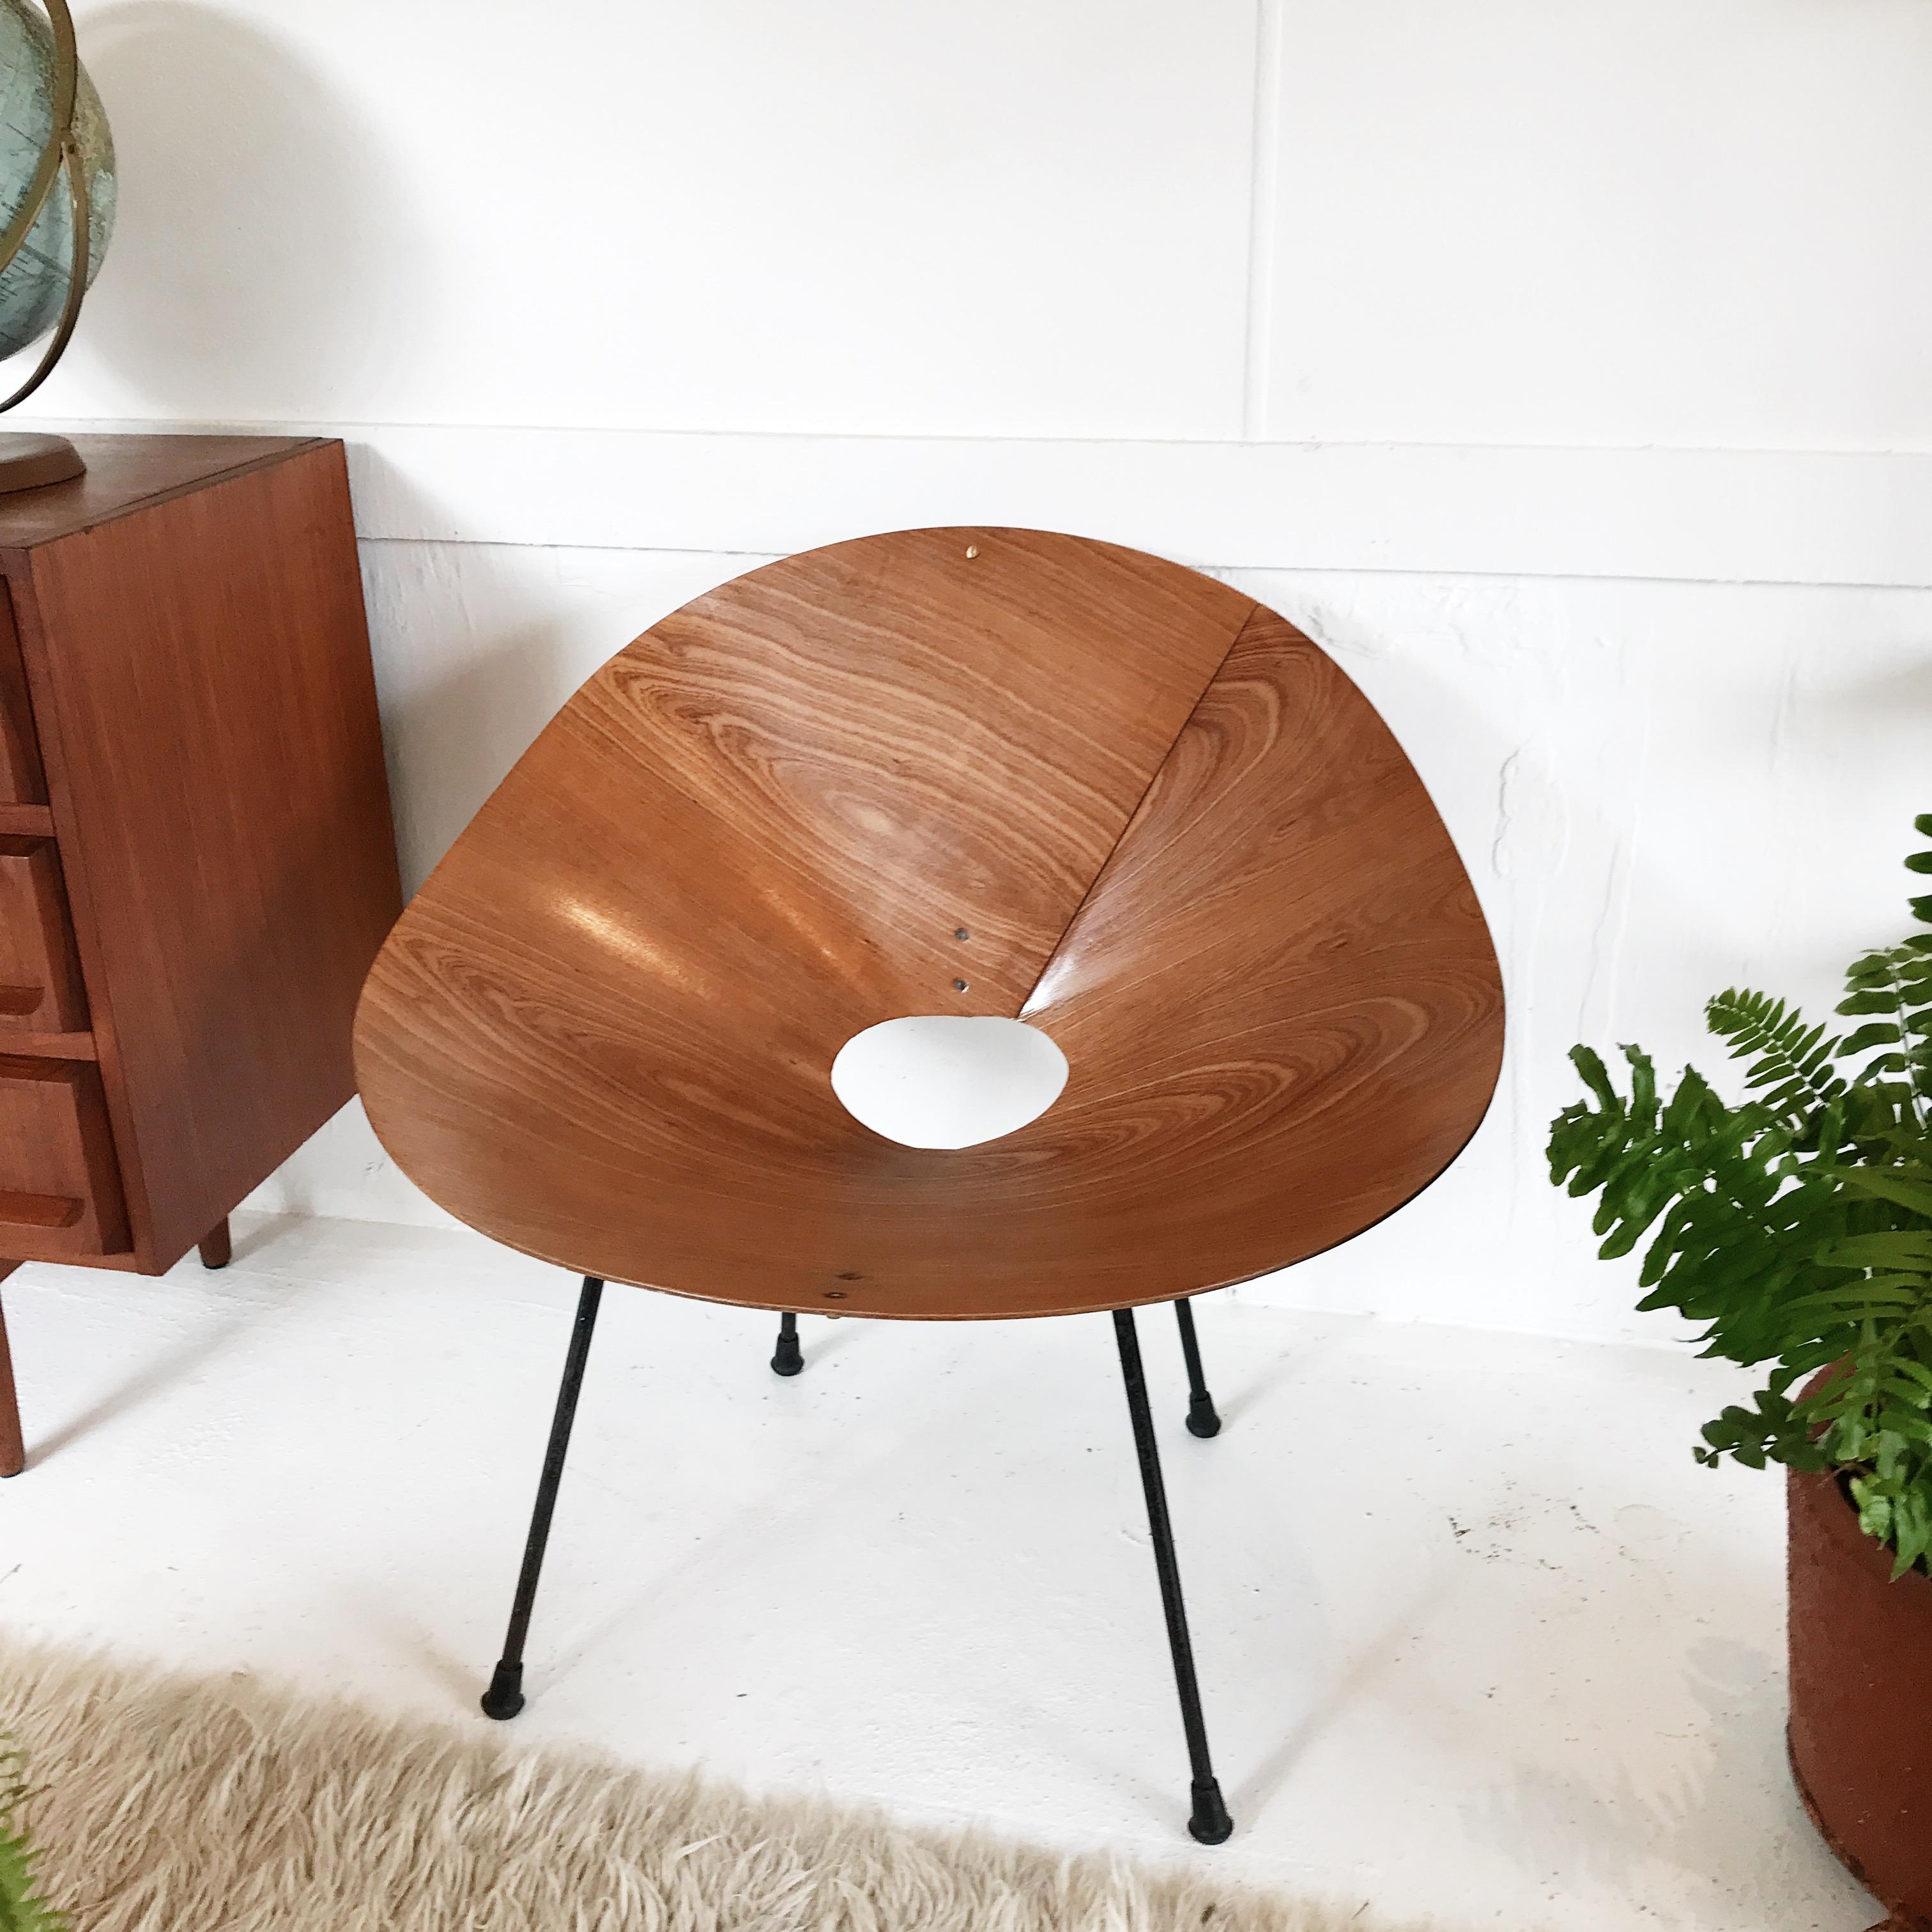 Roger McLay was a true Pioneer in Australian post-war design (and construction) and the Kone chair is by far his most iconic invention. It was made of shaped plywood, which was carefully bent into a cone shape and delicately balanced on four Japan